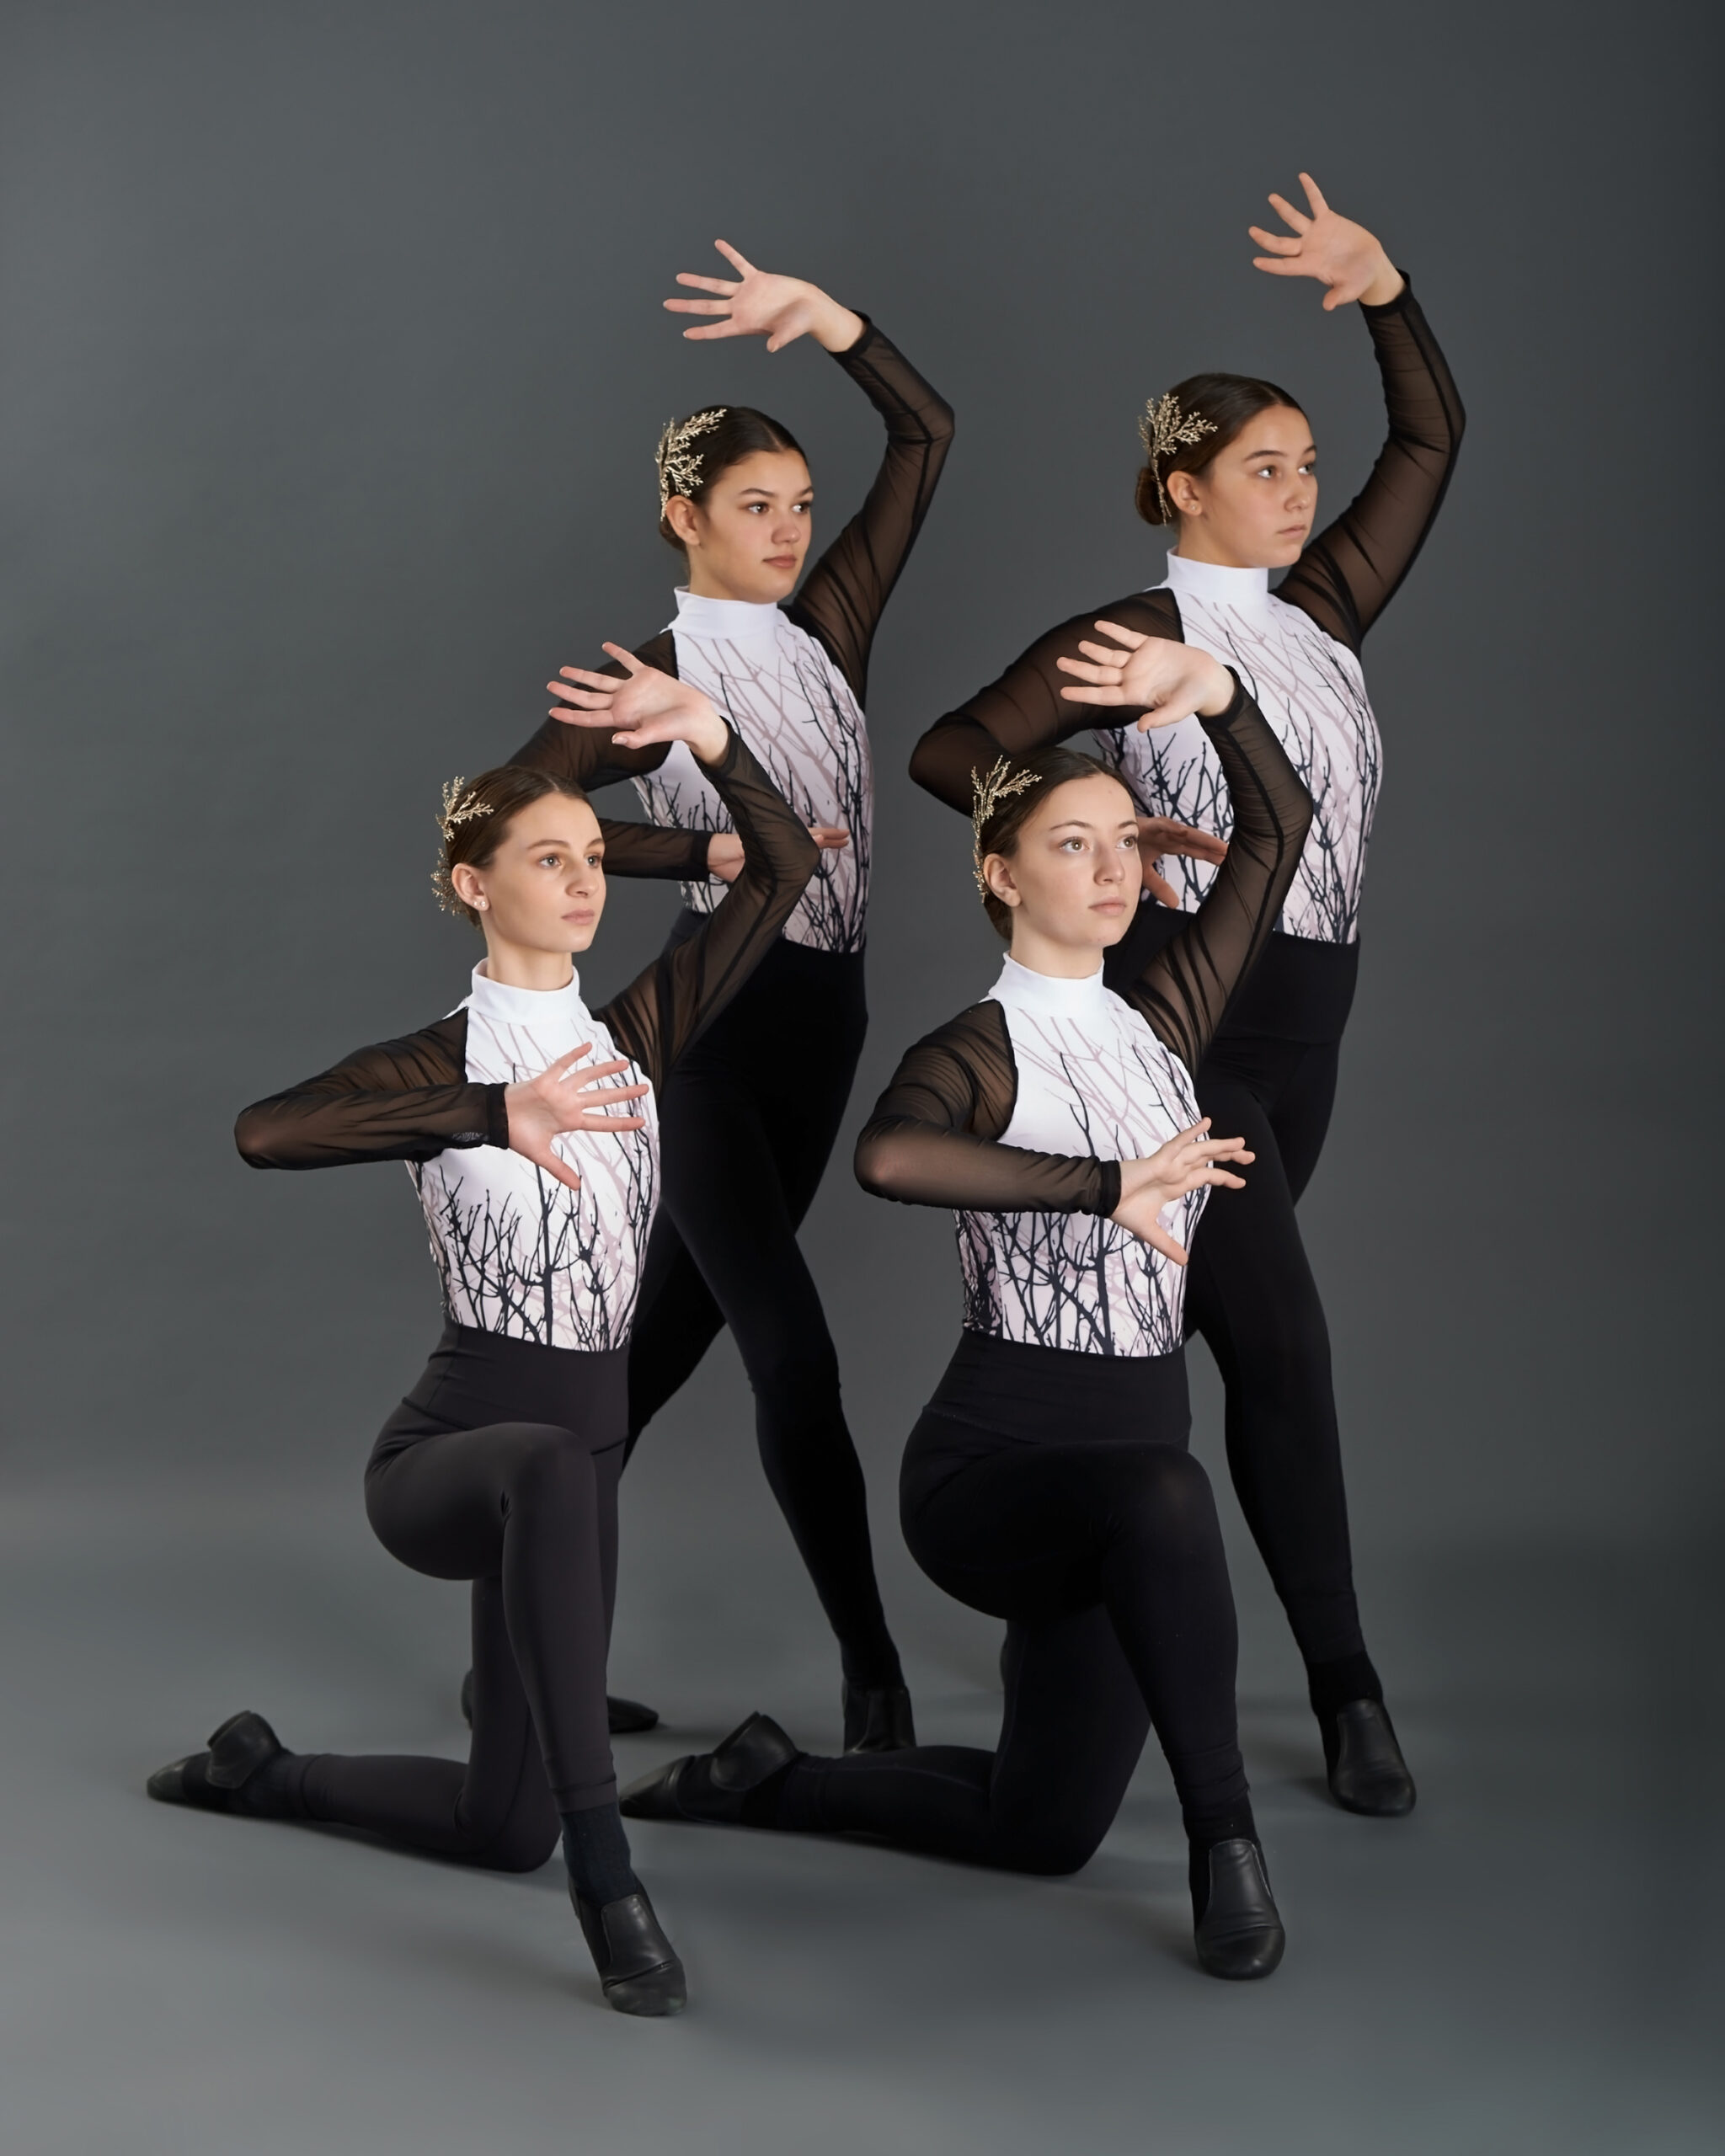 dance ensemble dancers posing in costumes with silver tops and black pants and shoes